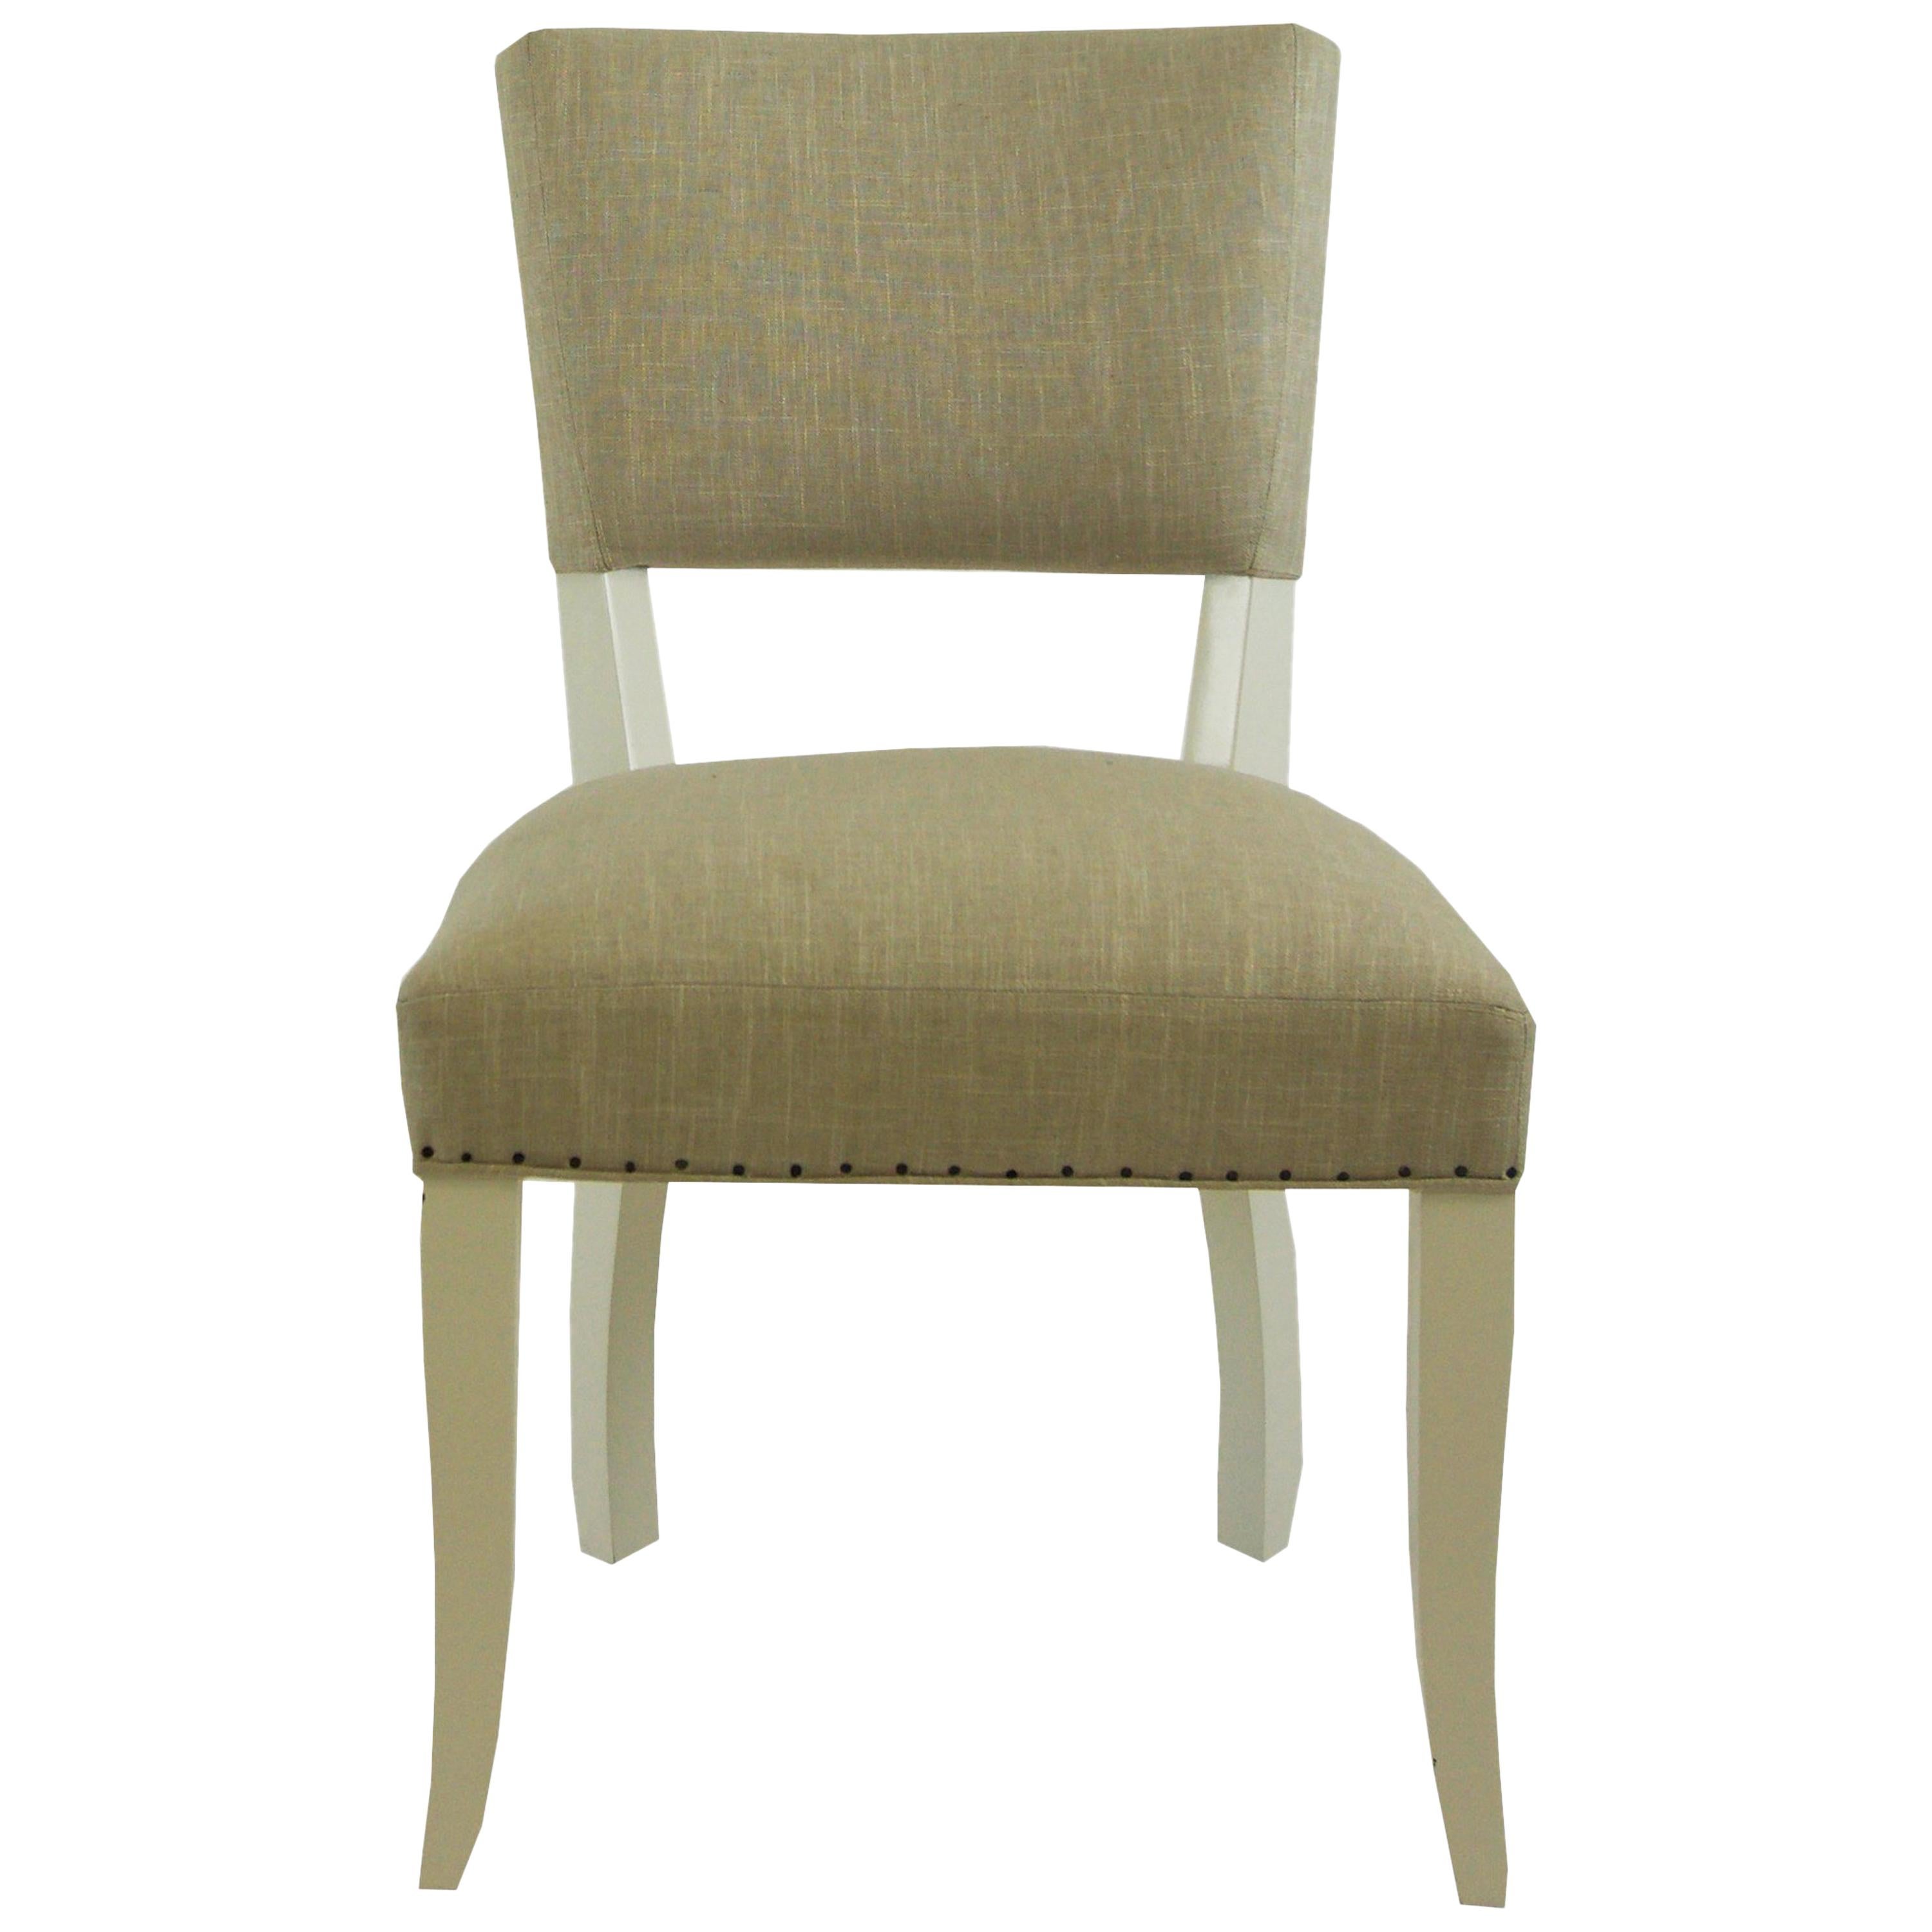 Transitional Armless Dining Chair For Sale